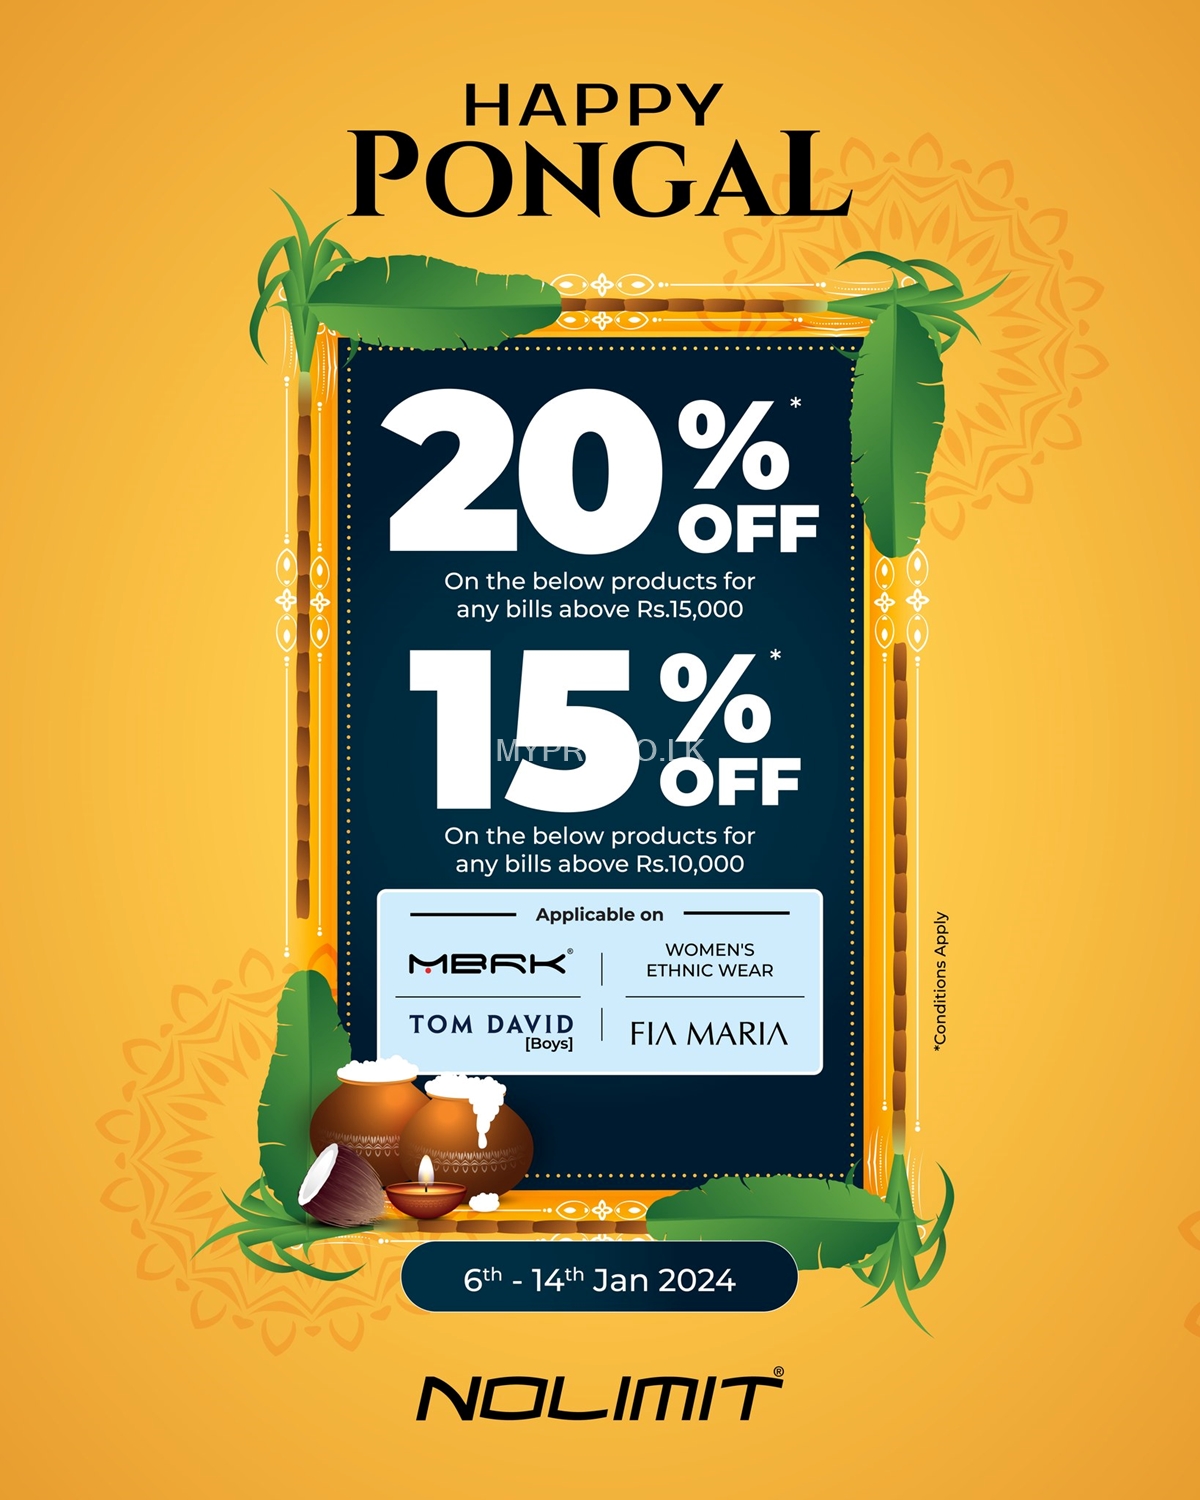 Get up to 20% Off at NOLIMIT for this Thai Pongal